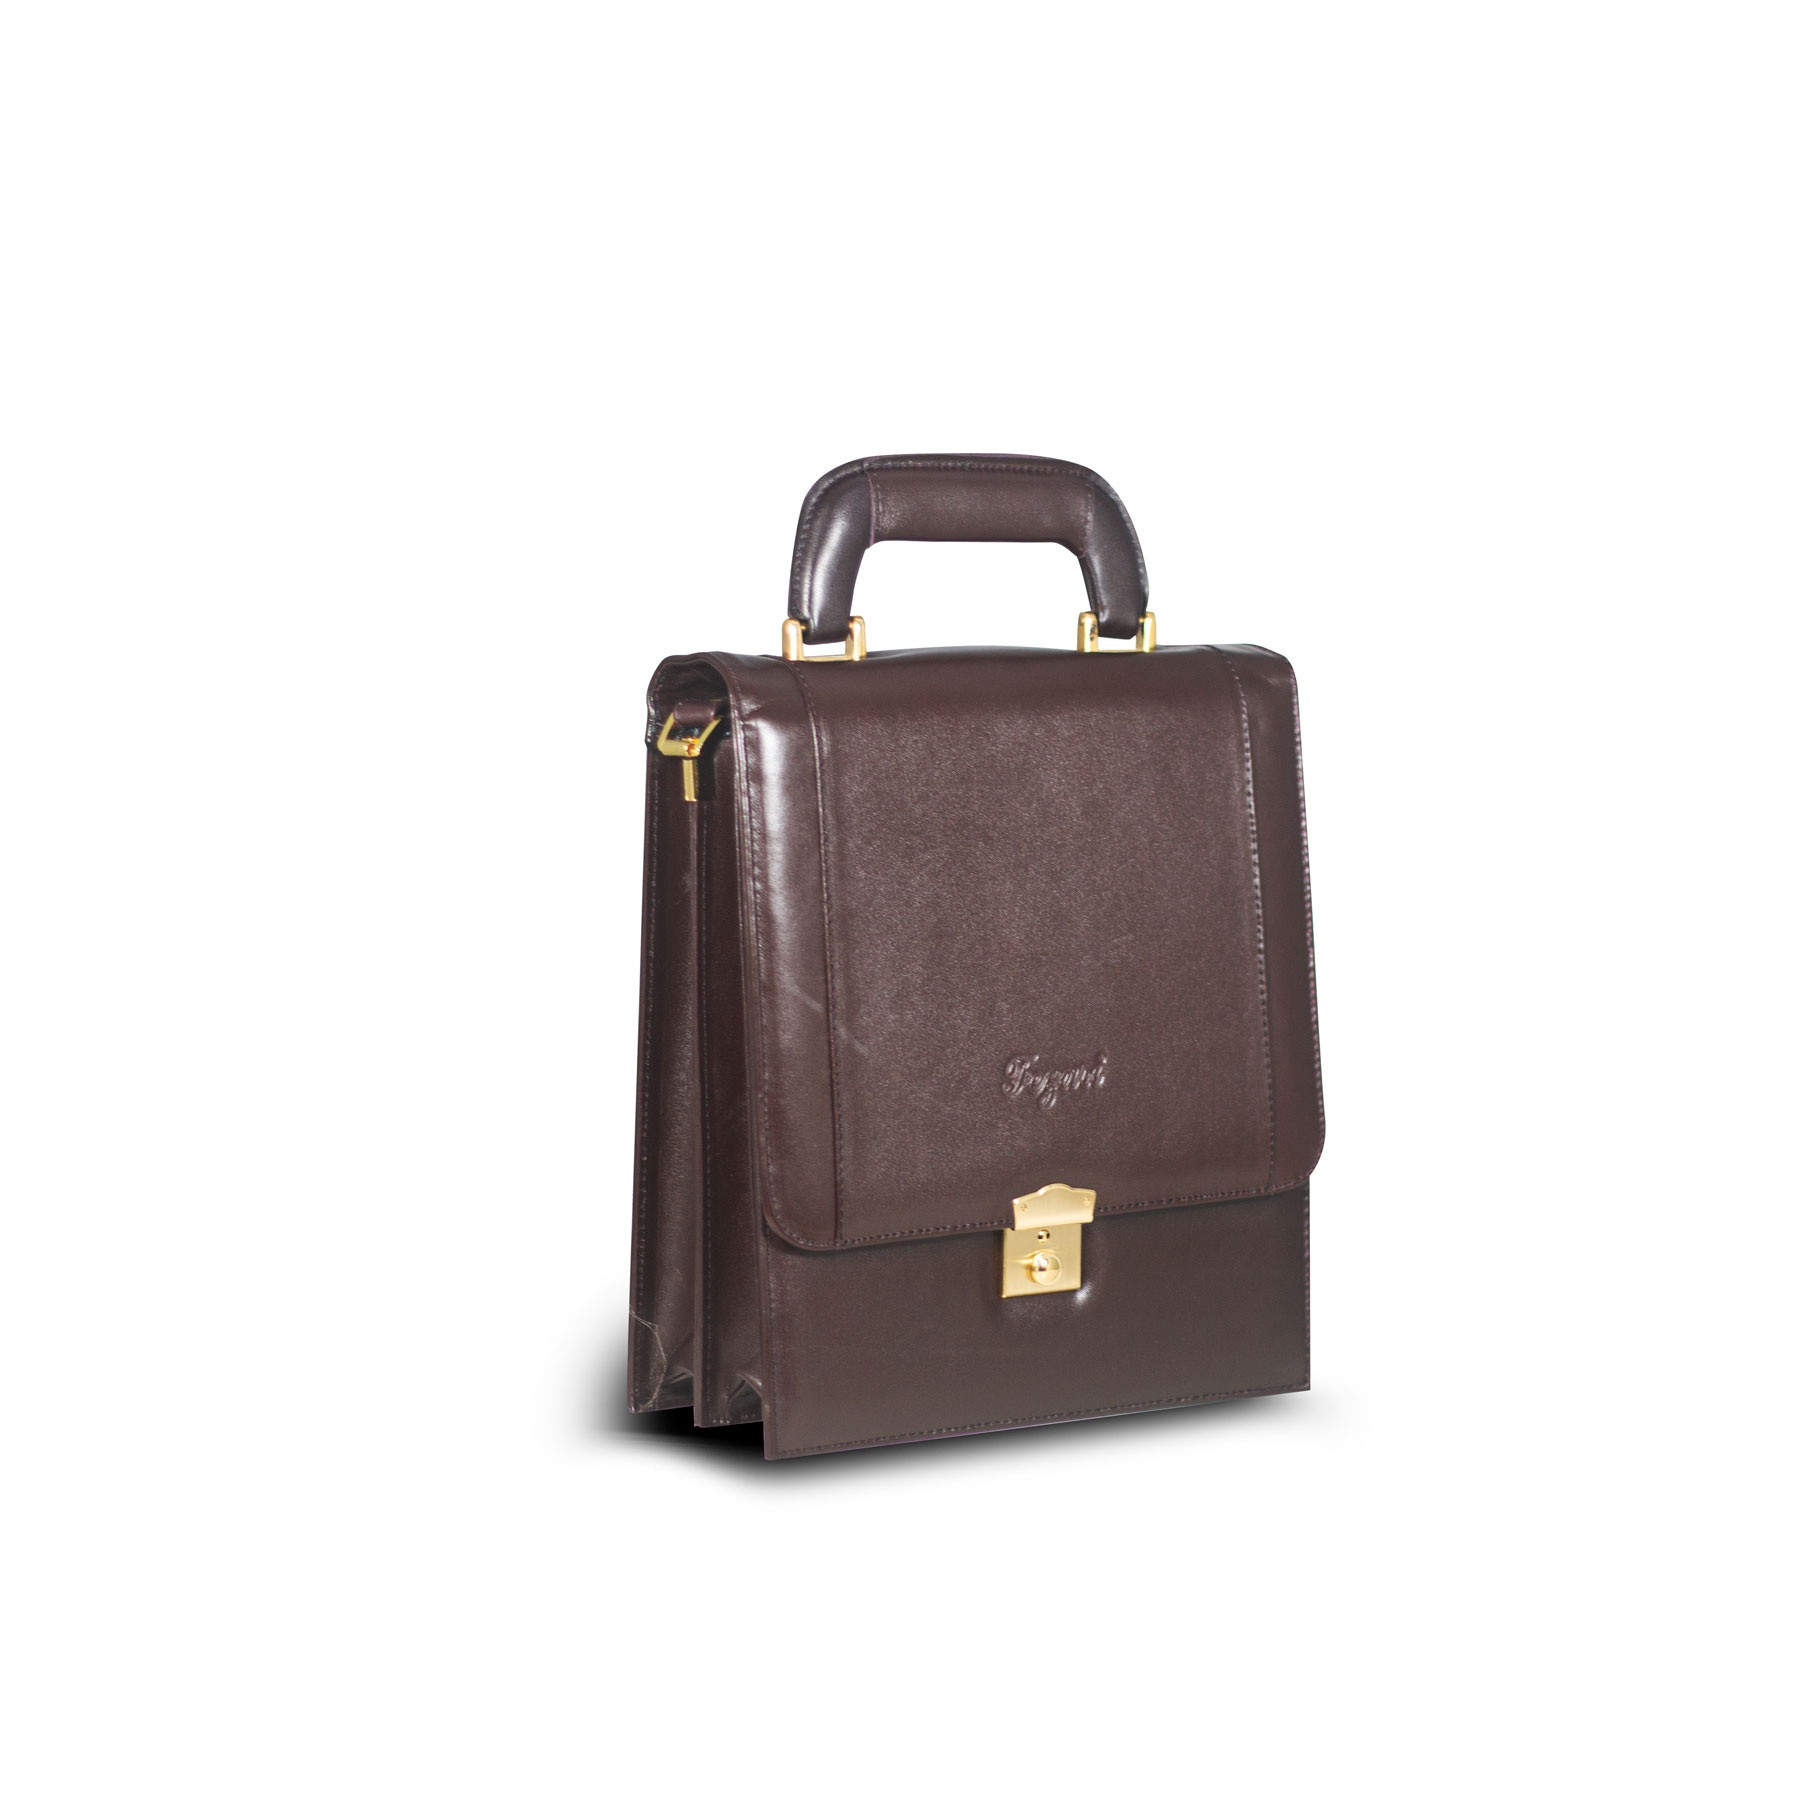 Sac Travail Homme Luxe